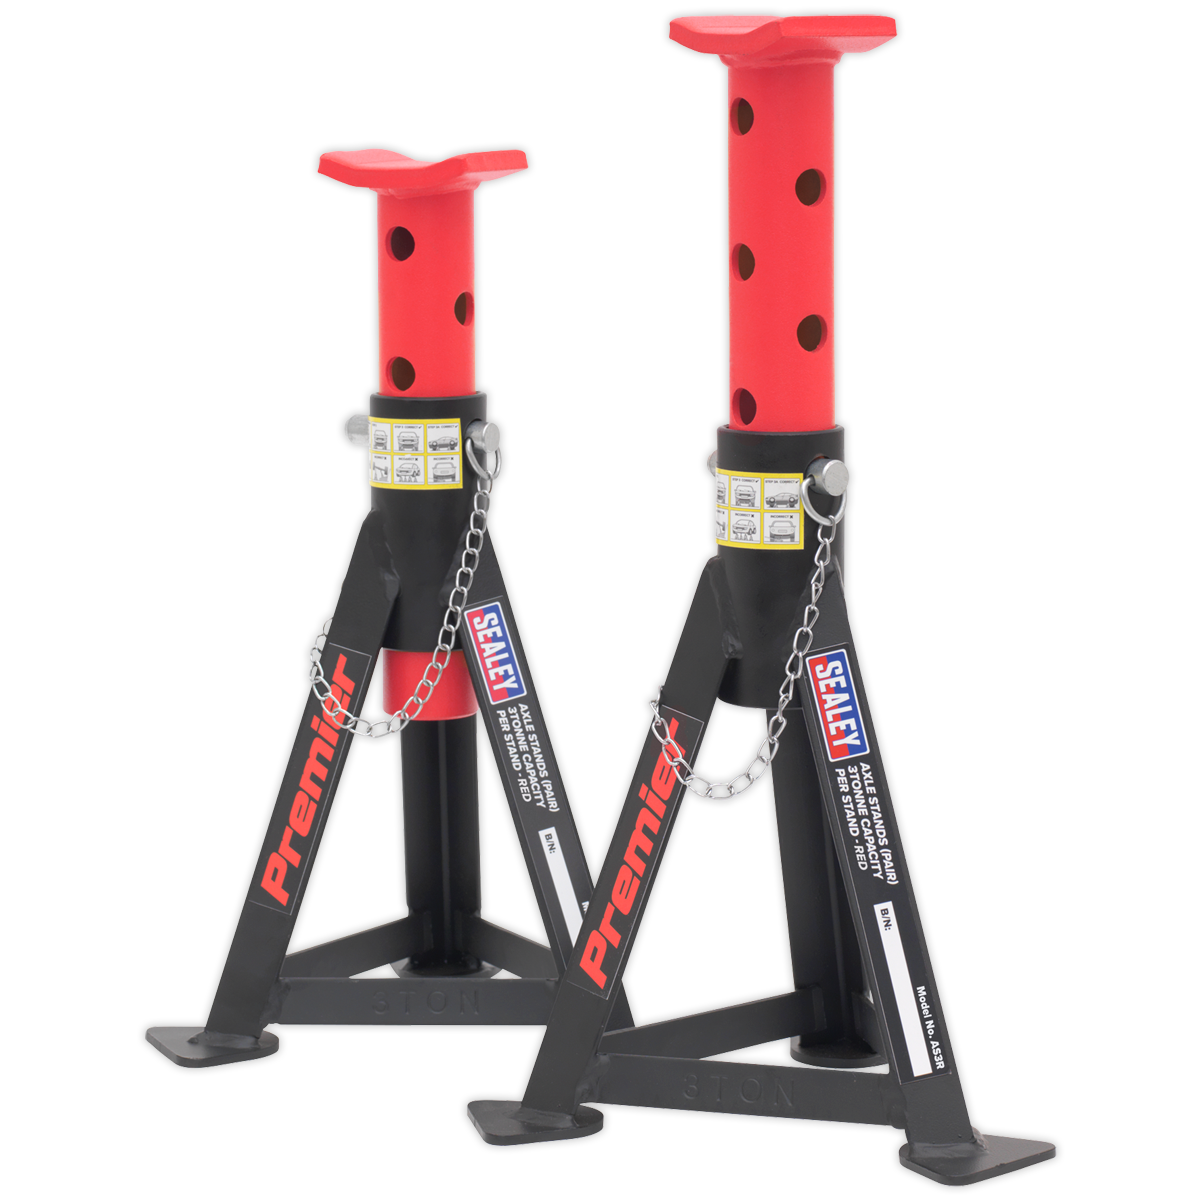 SEALEY - AS3R Axle Stands (Pair) 3tonne Capacity per Stand - Red